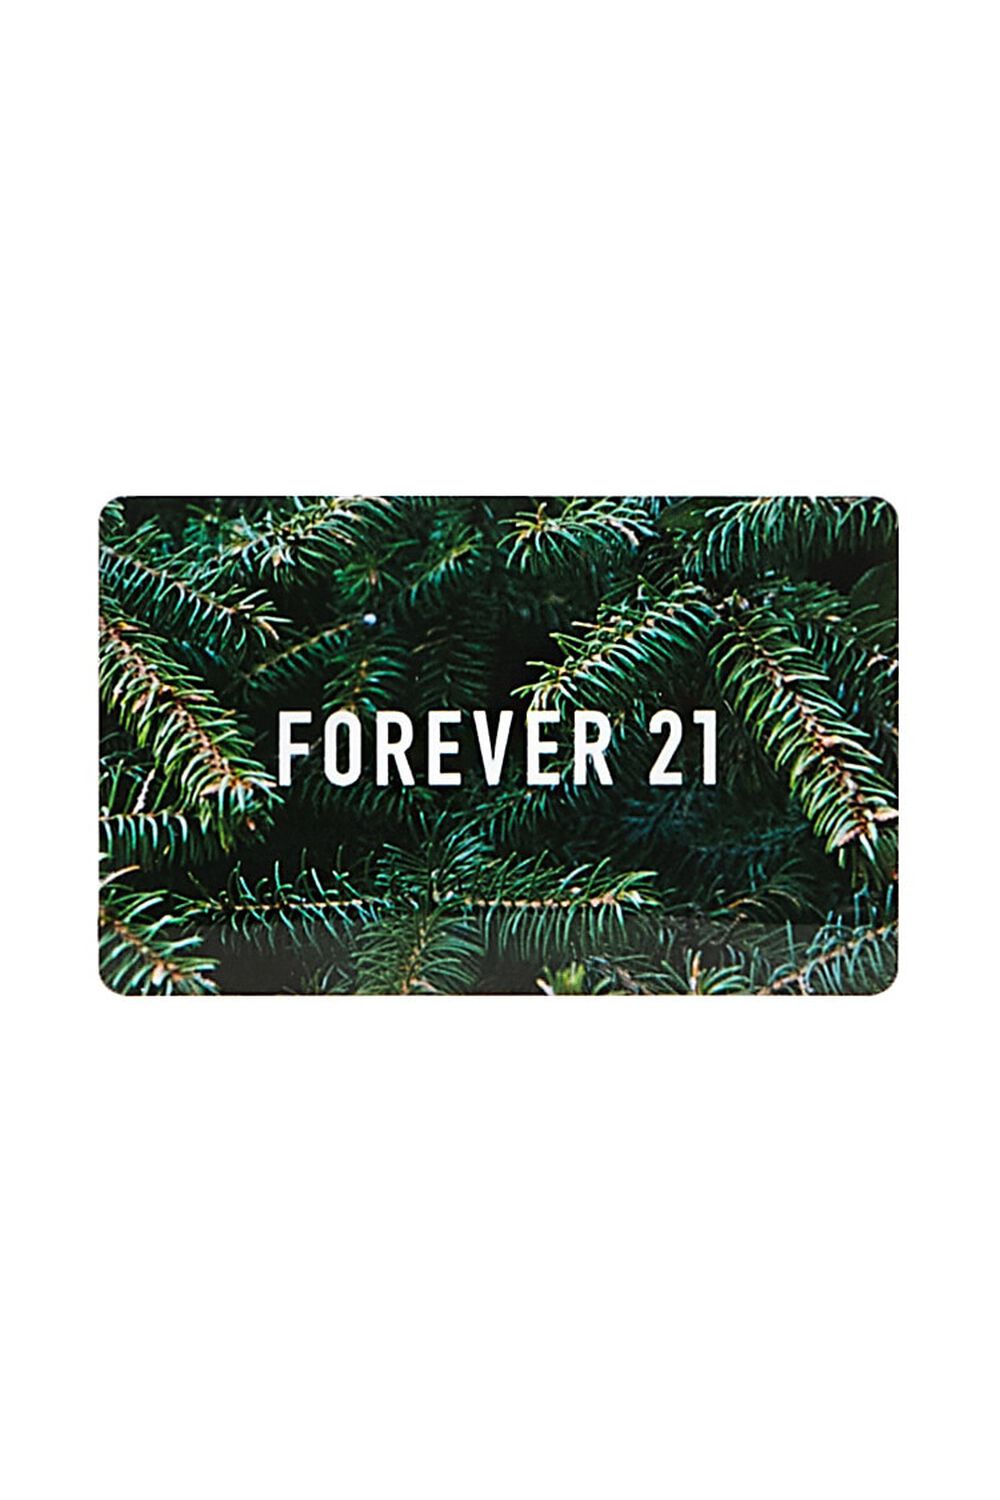 PINE TREE Forever 21 Gift Card, image 1